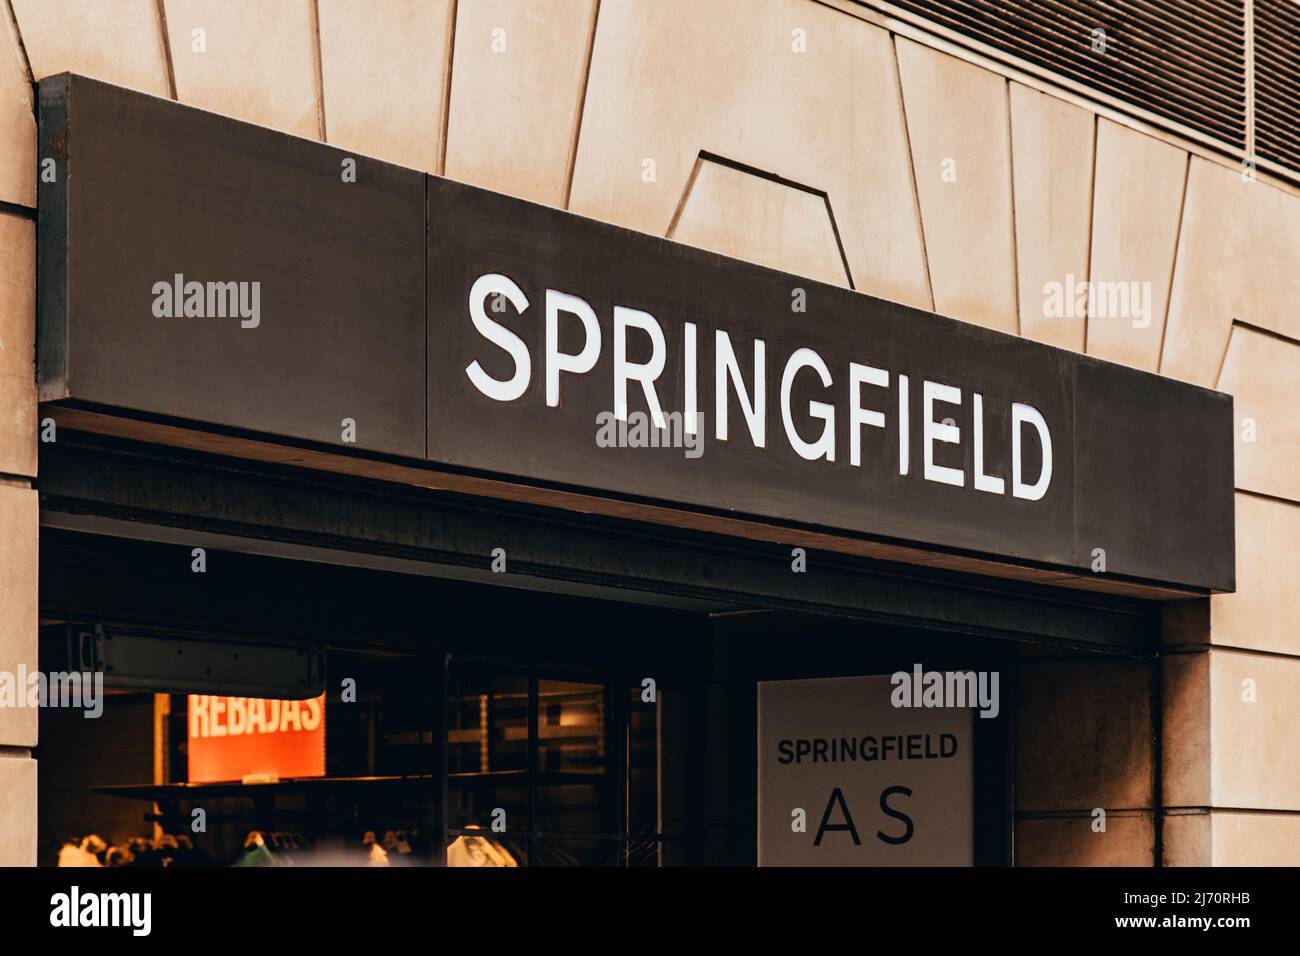 Springfield shop High Resolution Stock Photography and Images - Alamy